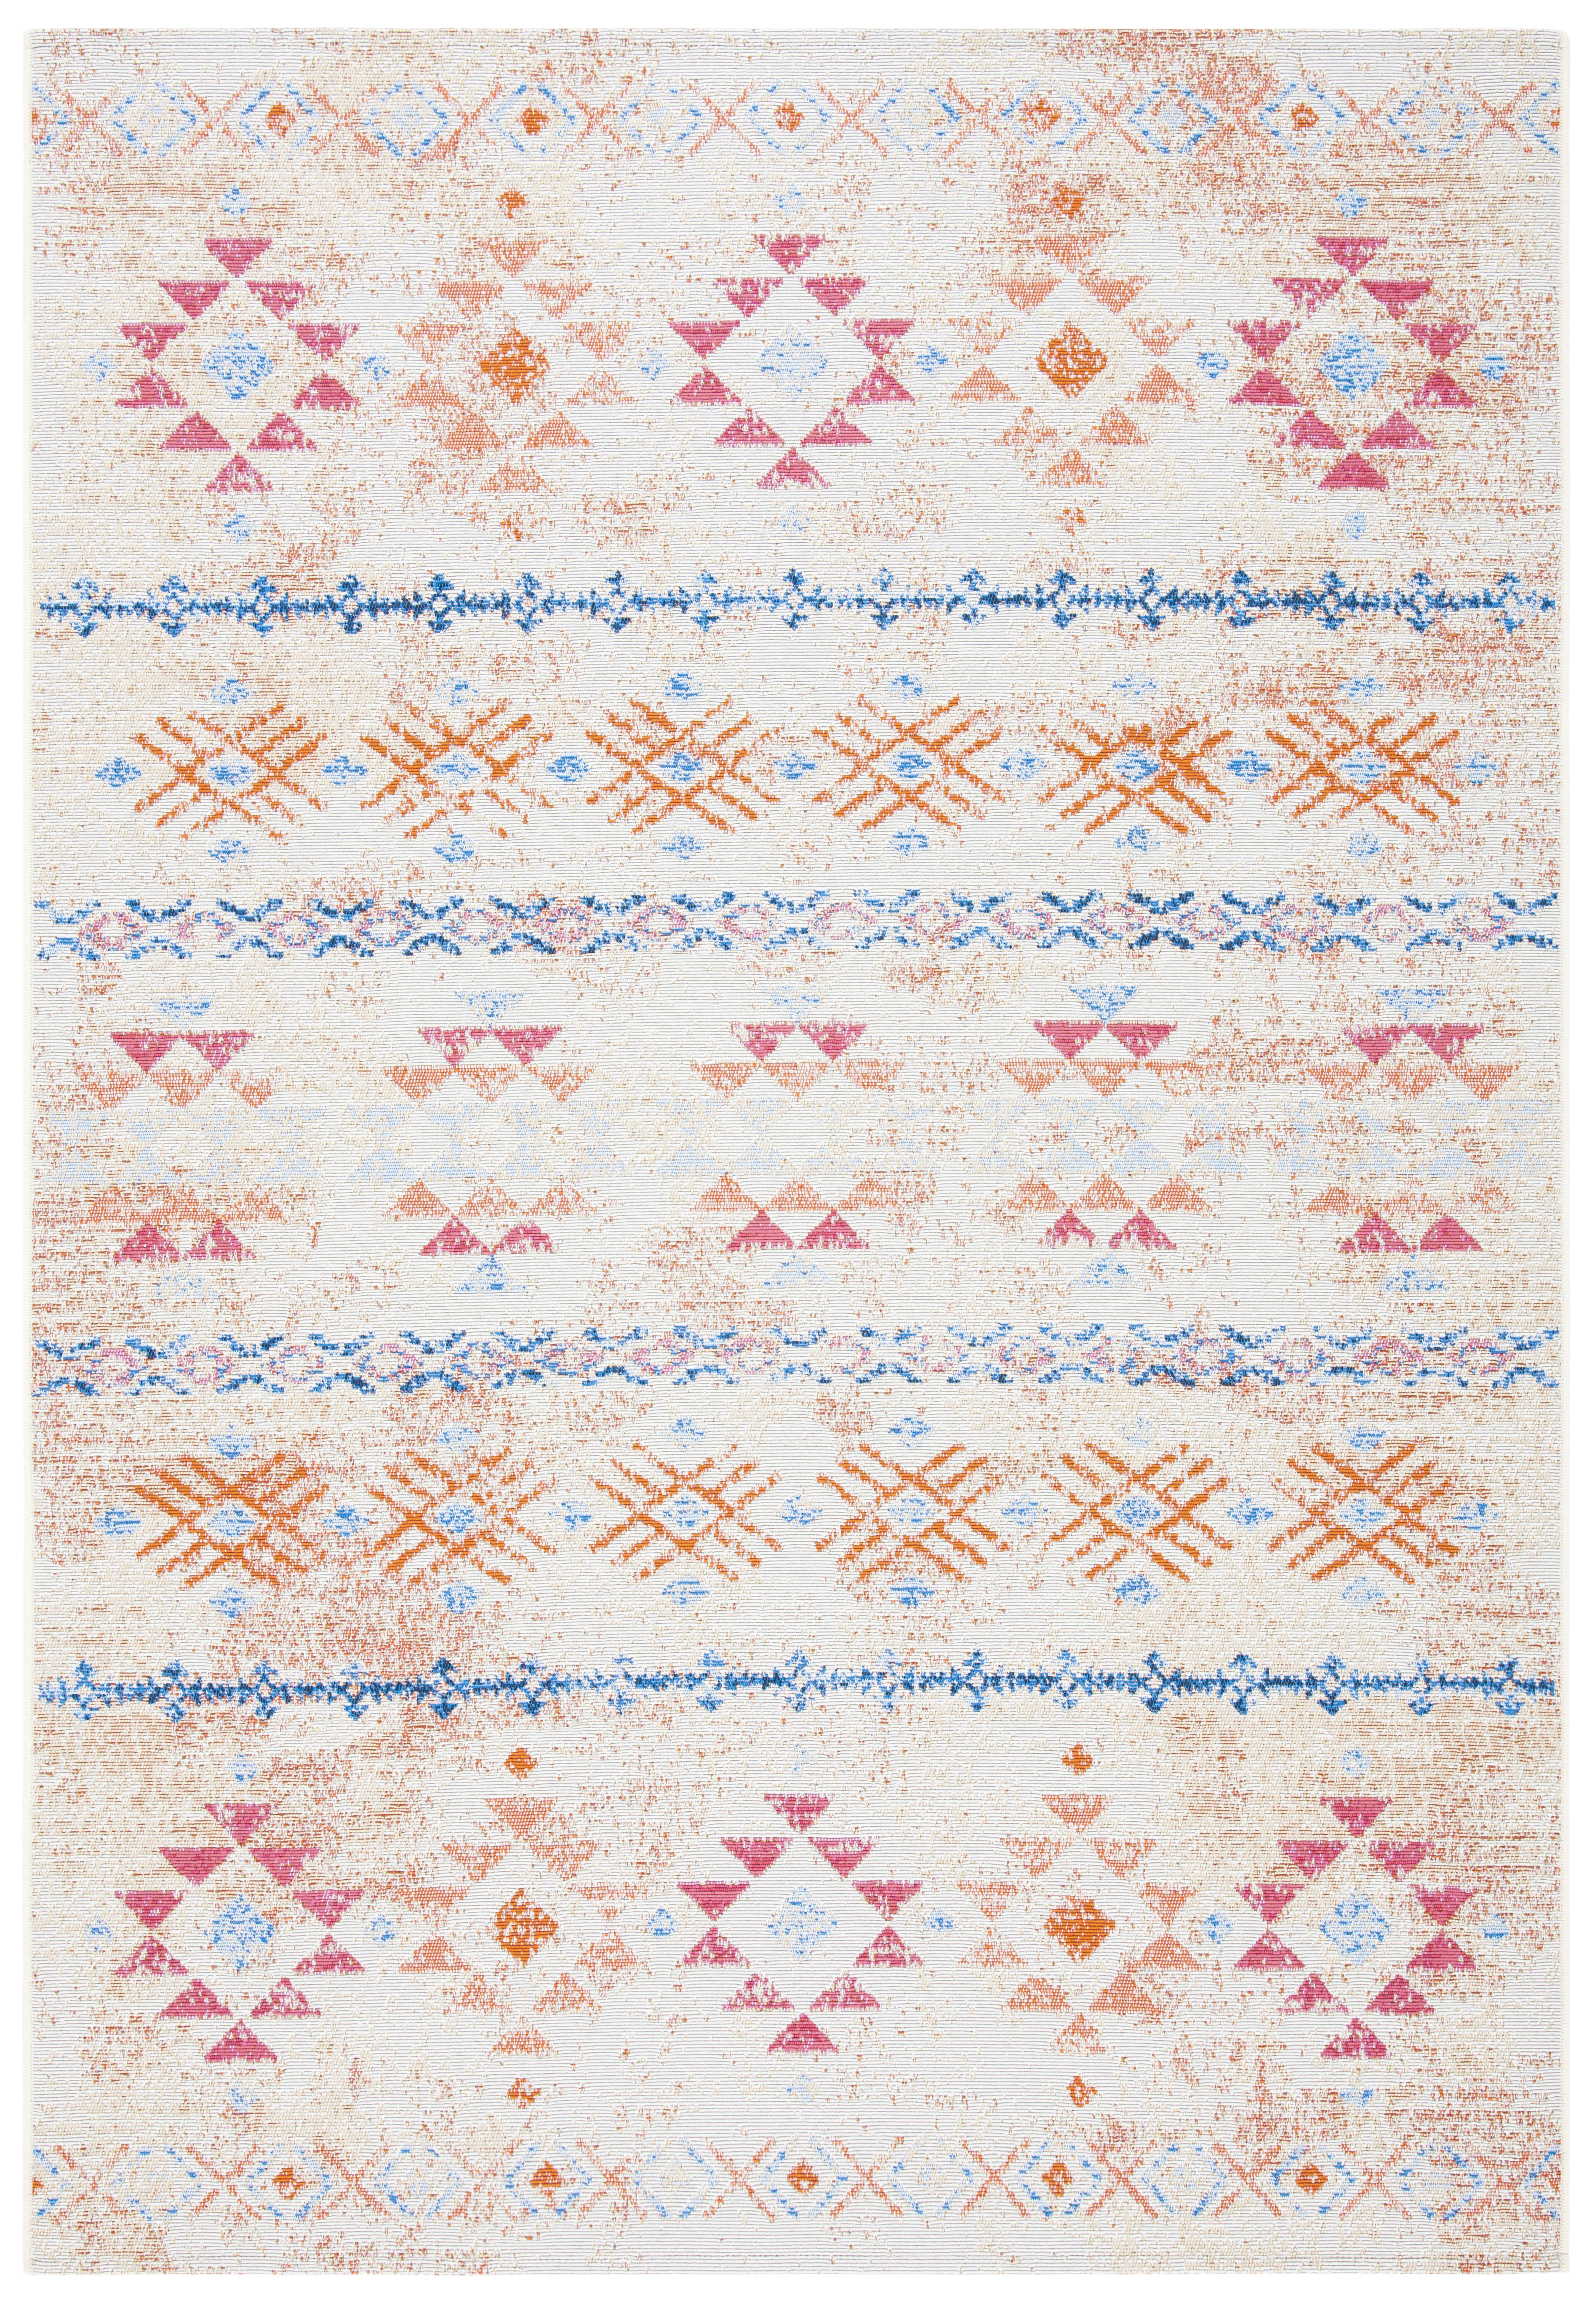 Safavieh Summer Donella Outdoor Boho Distressed Area Rug, Ivory/Red, 6'7" x 6'7" Square - image 2 of 6